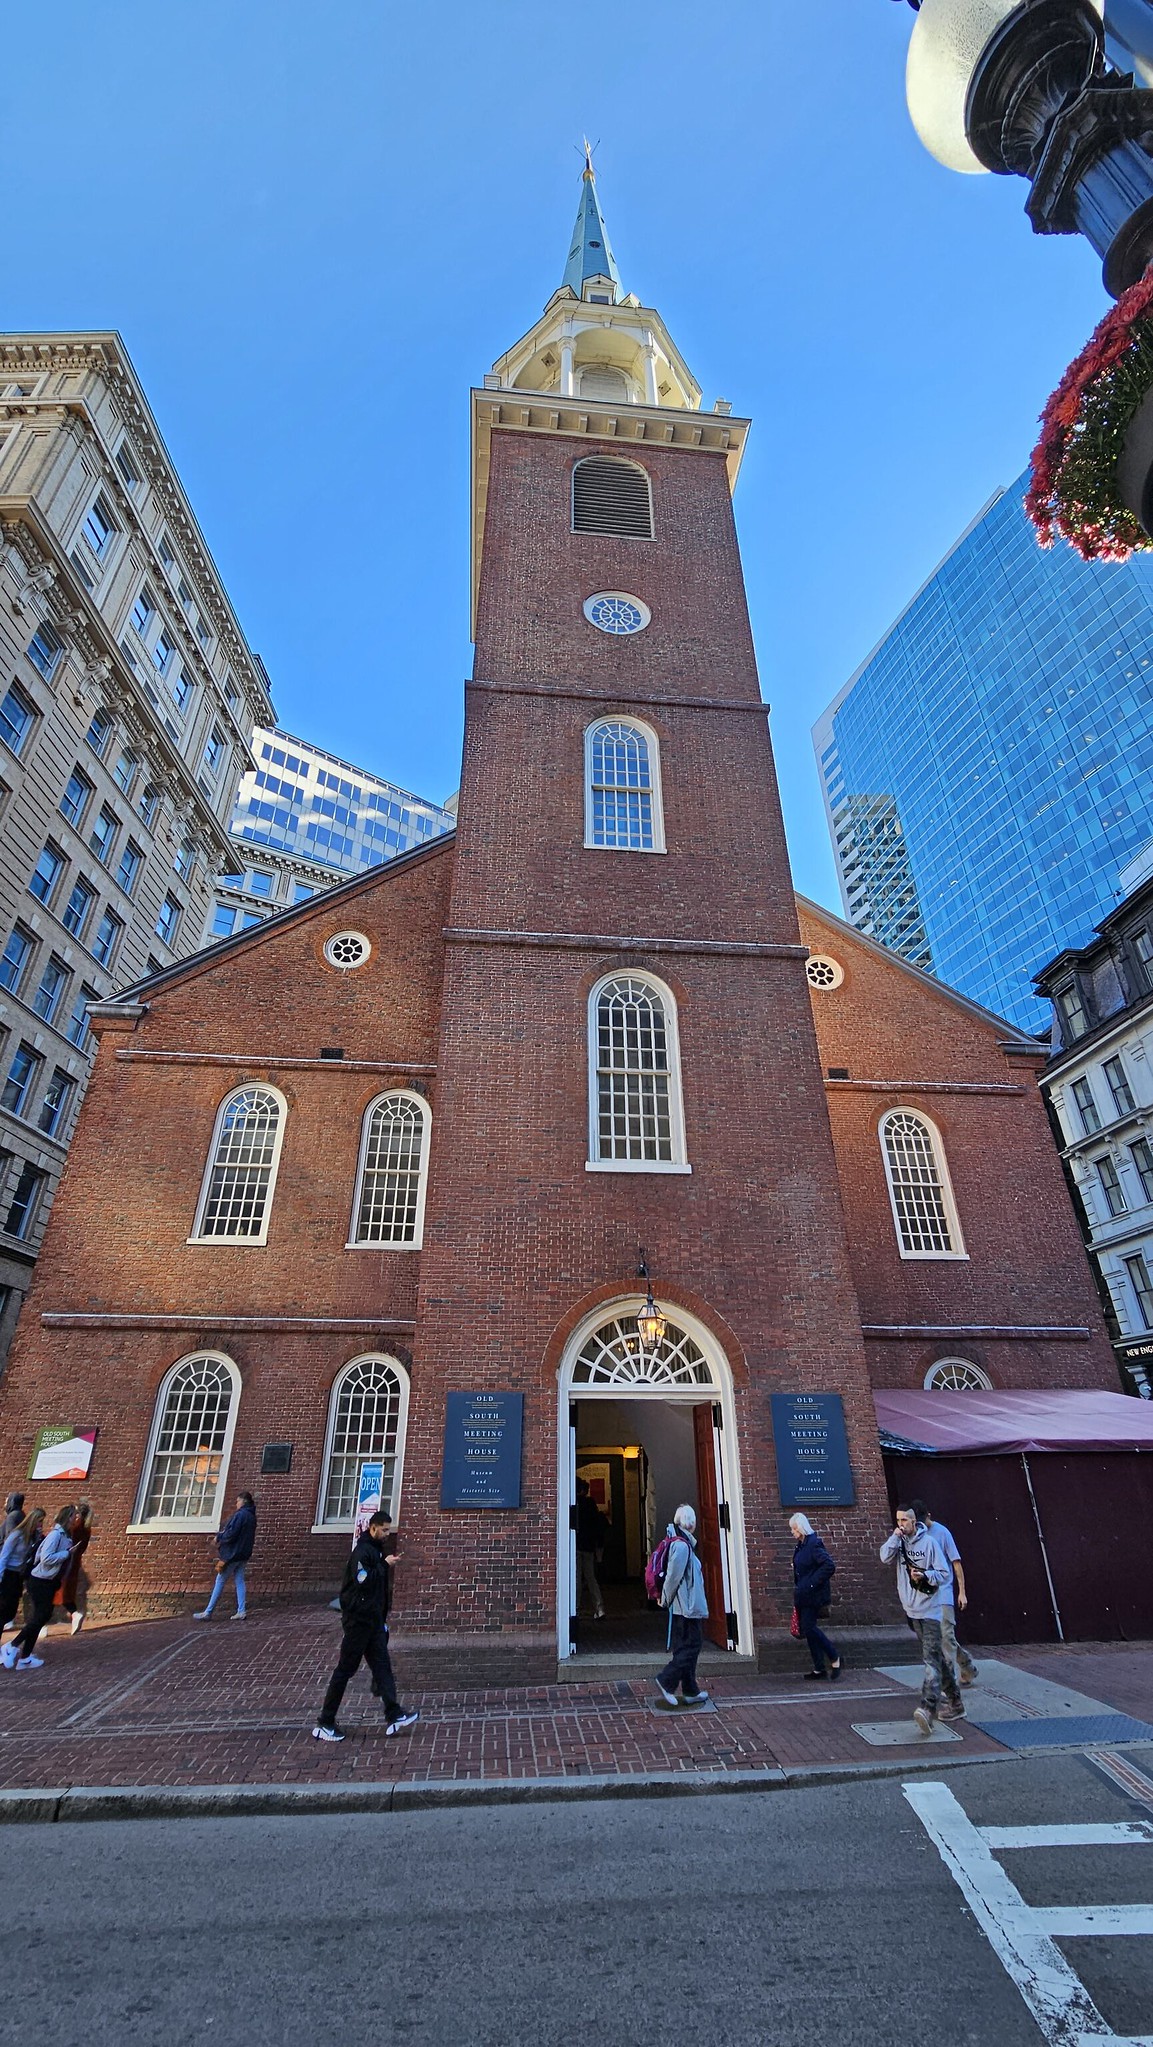 The Old South Meeting House in Bostgon